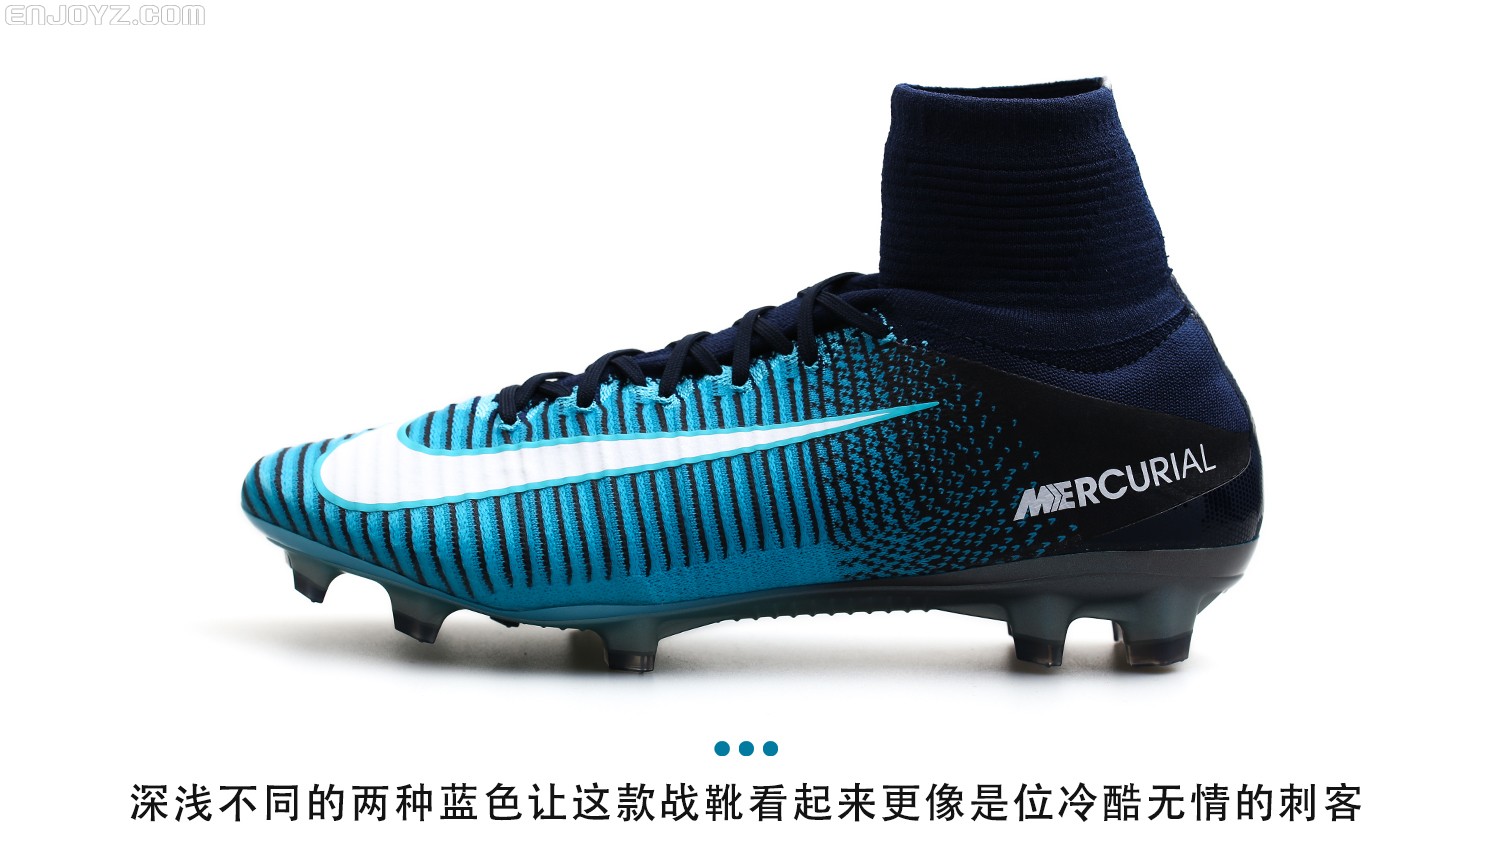 Nike Mercurial Superfly 360 Elite FG Just Do It Chaussures de